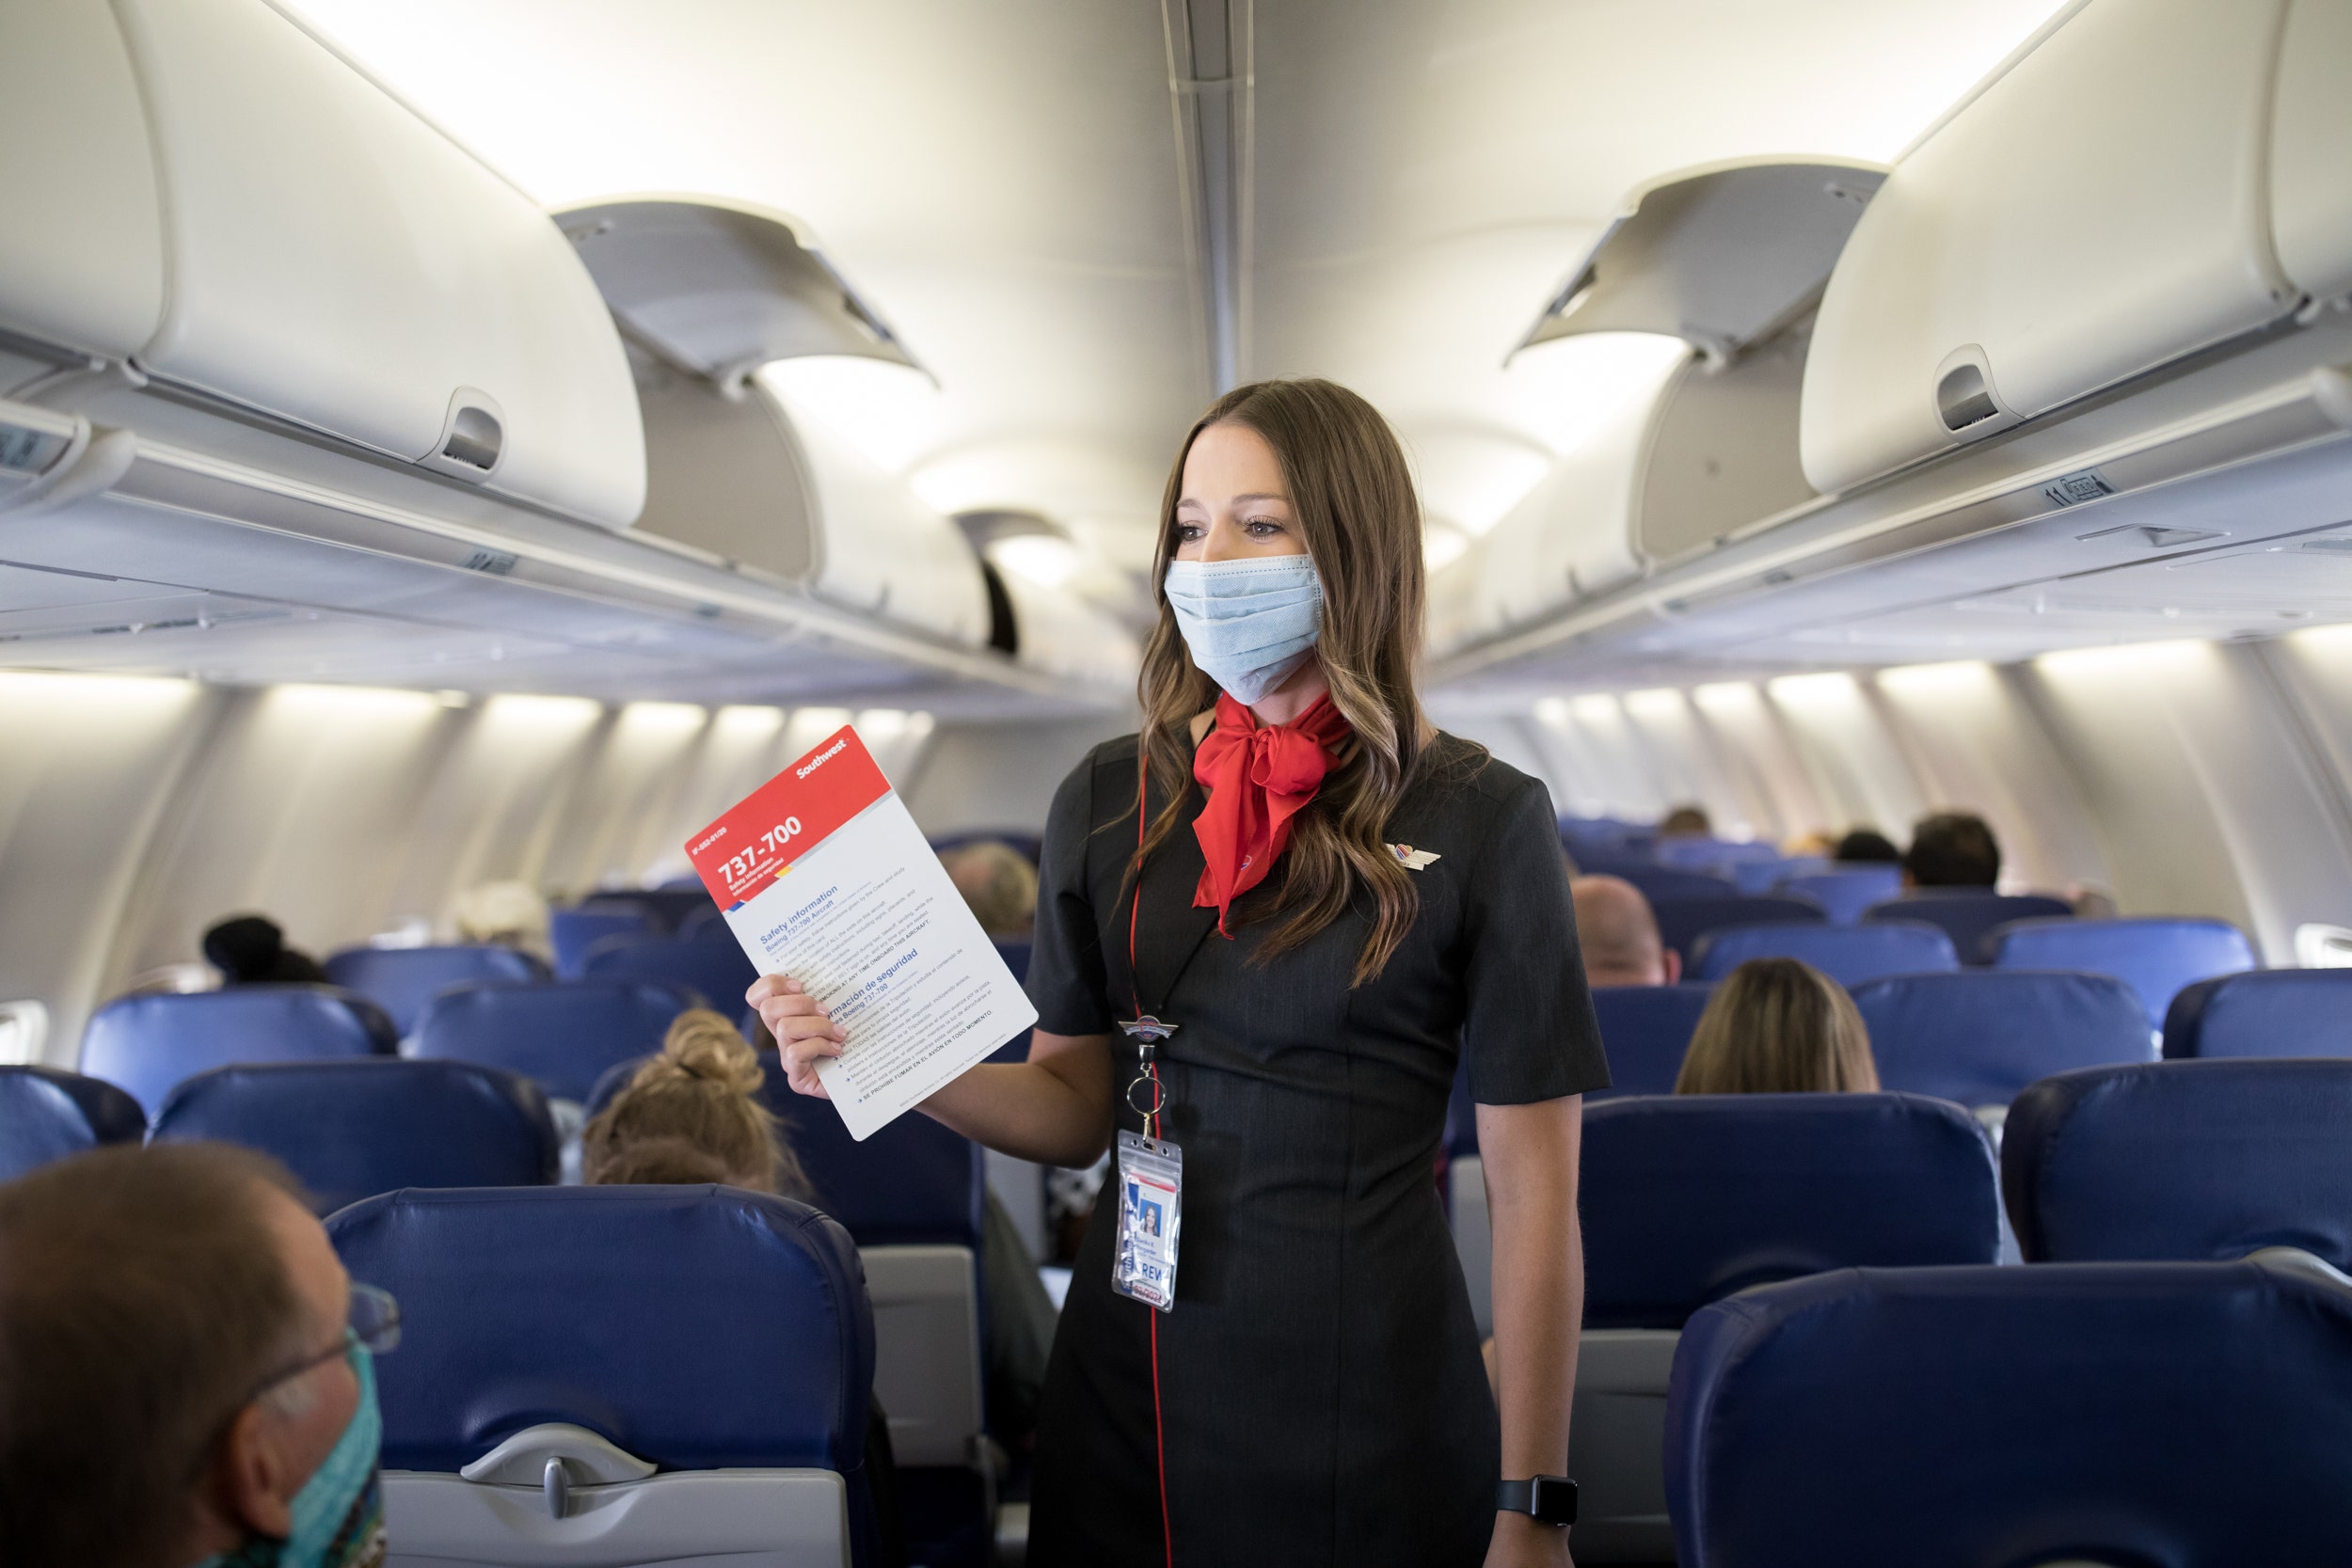 Southwest Airlines to give employees COVID-19 vaccine for free